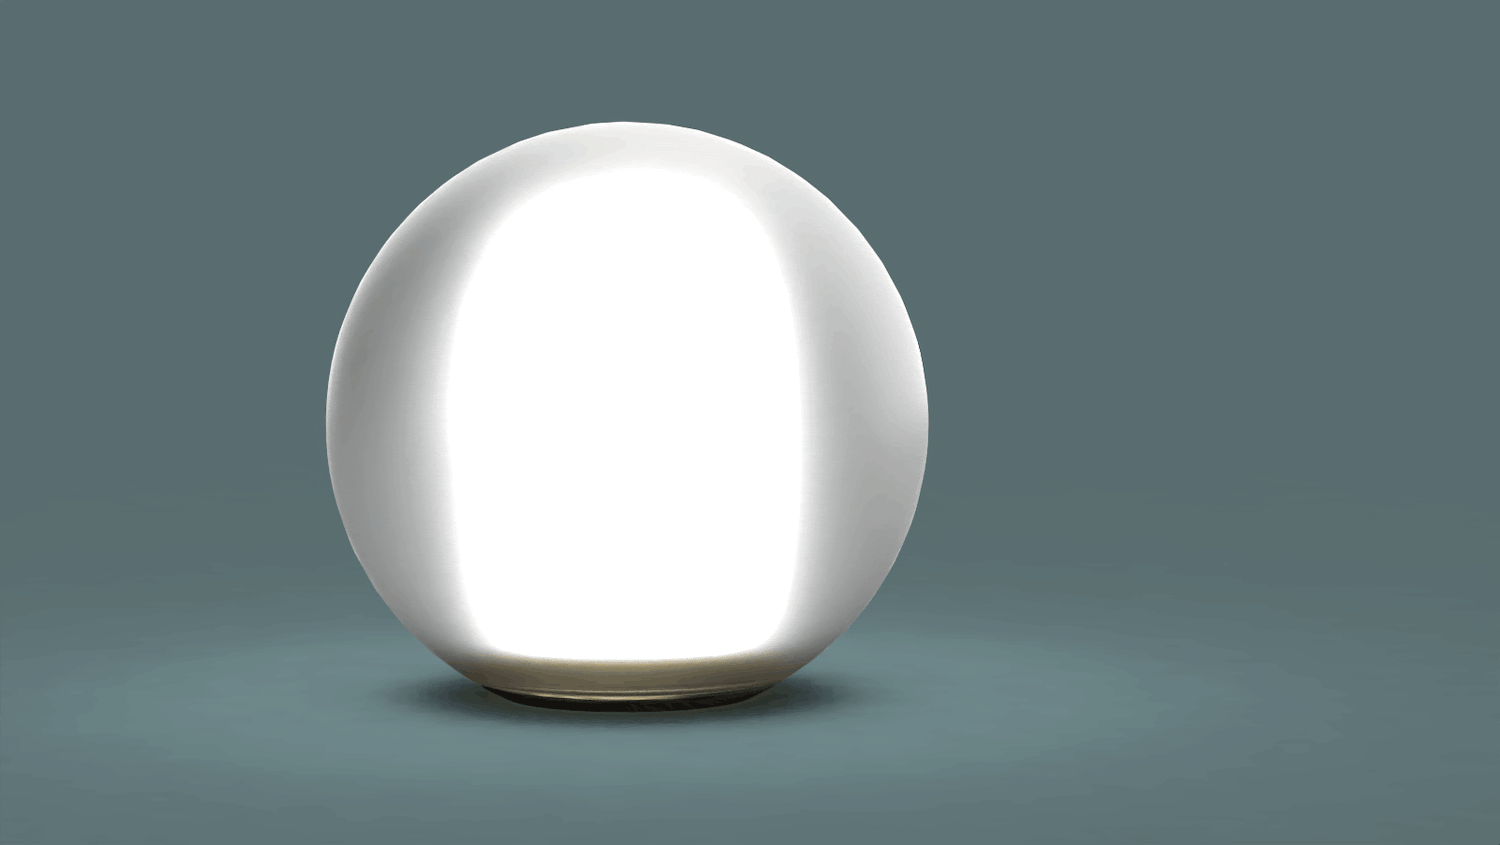 This image shows just the sphere-like device turning on and off with a plain blue-gray background.